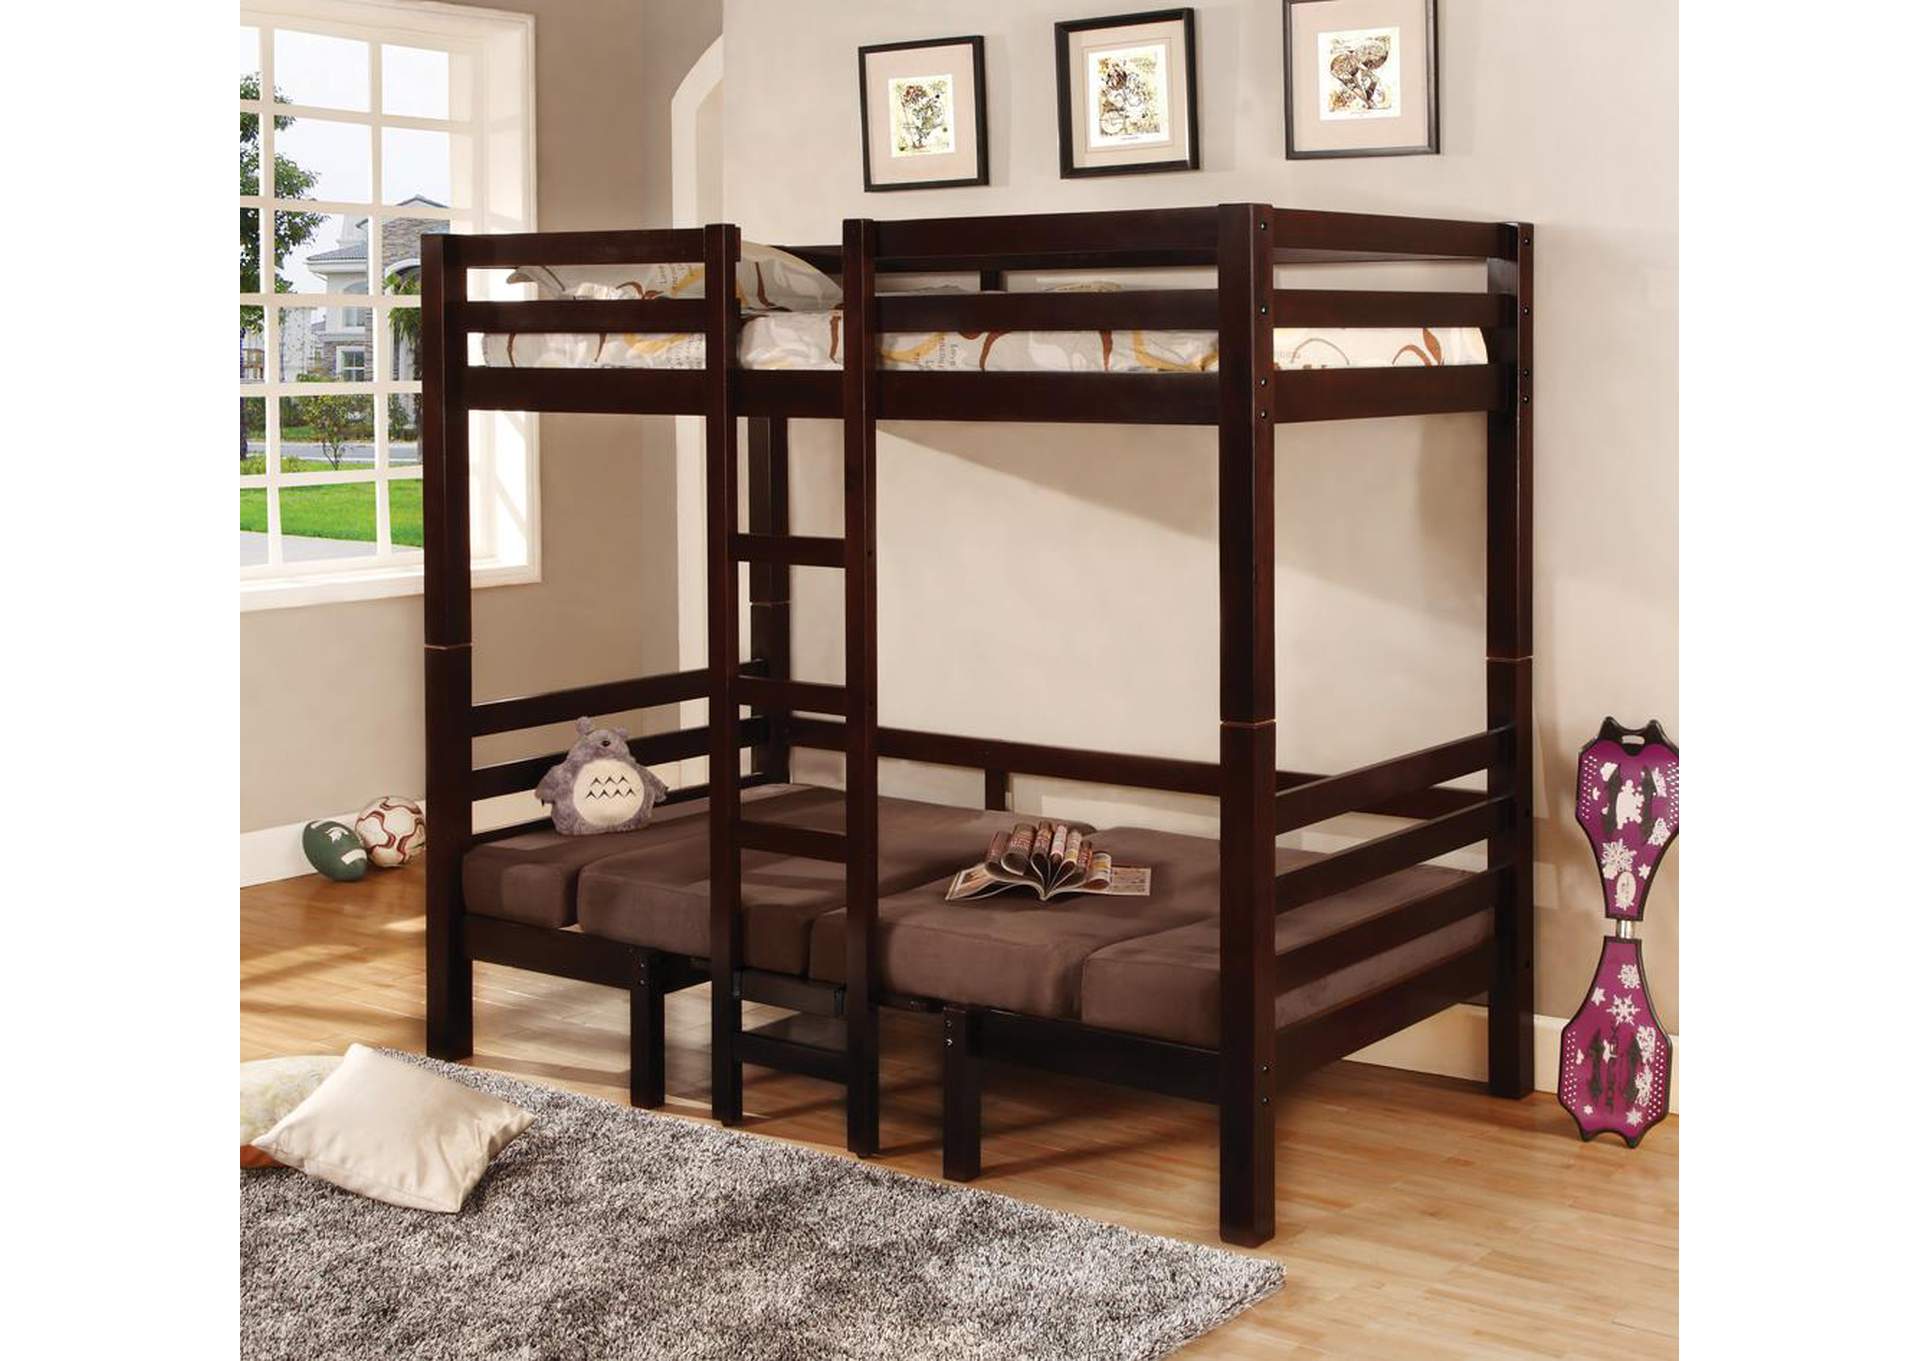 Joaquin Transitional Medium Brown Twin-over-Twin Bunk Bed,Coaster Furniture